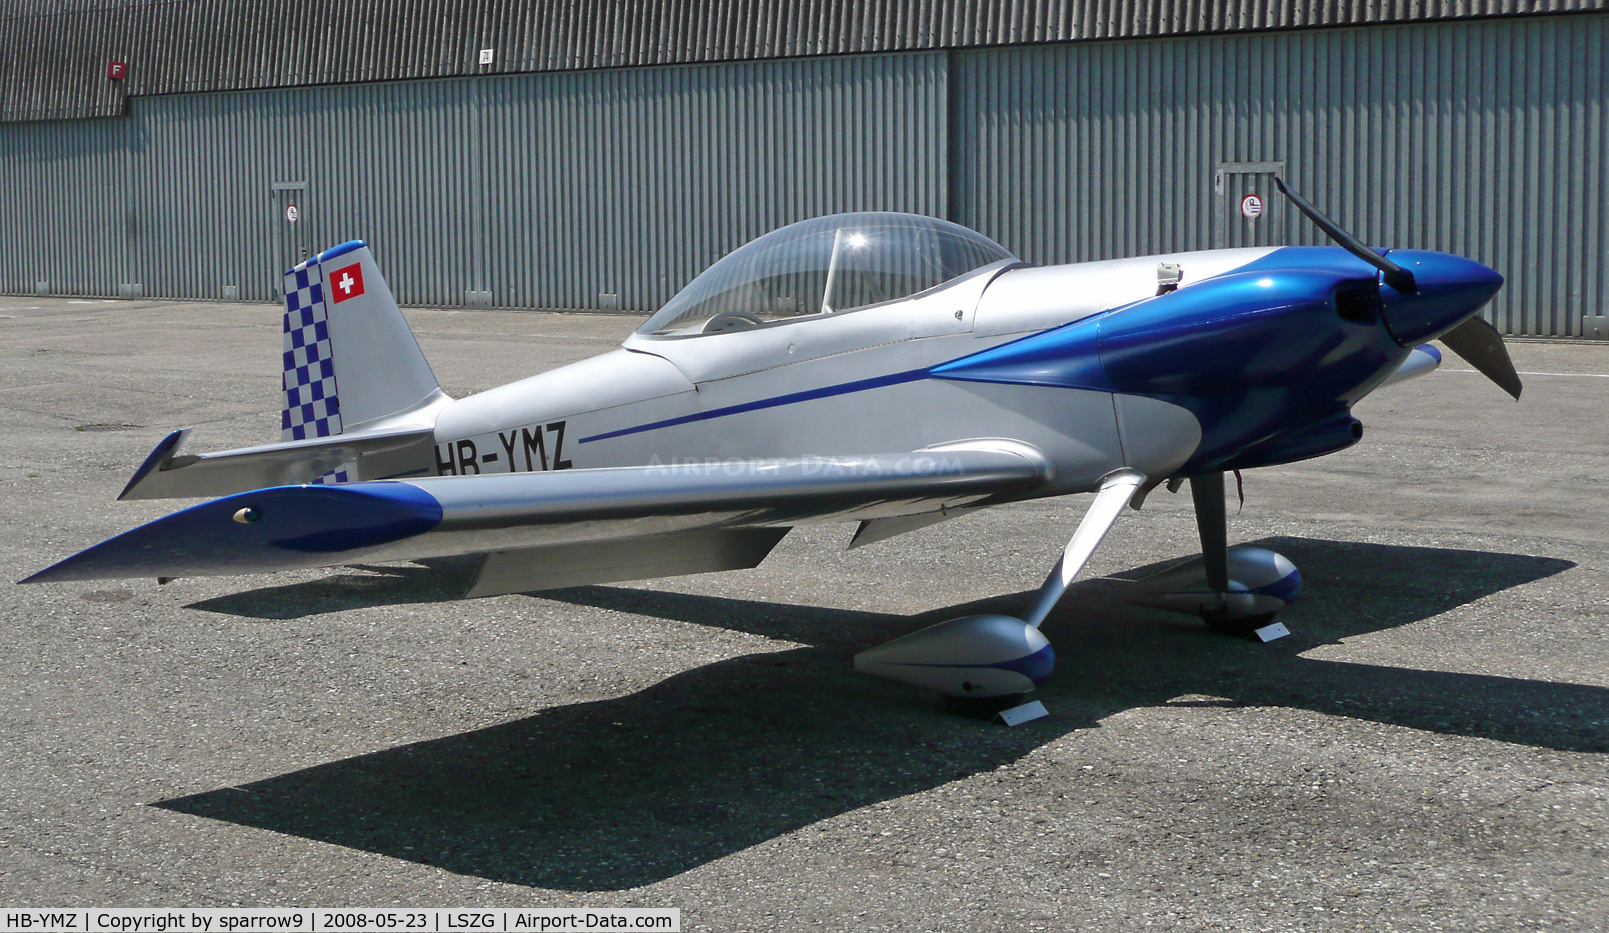 HB-YMZ, 2008 Vans RV-4 C/N 2422, One month after the first flight, at Grenchen.